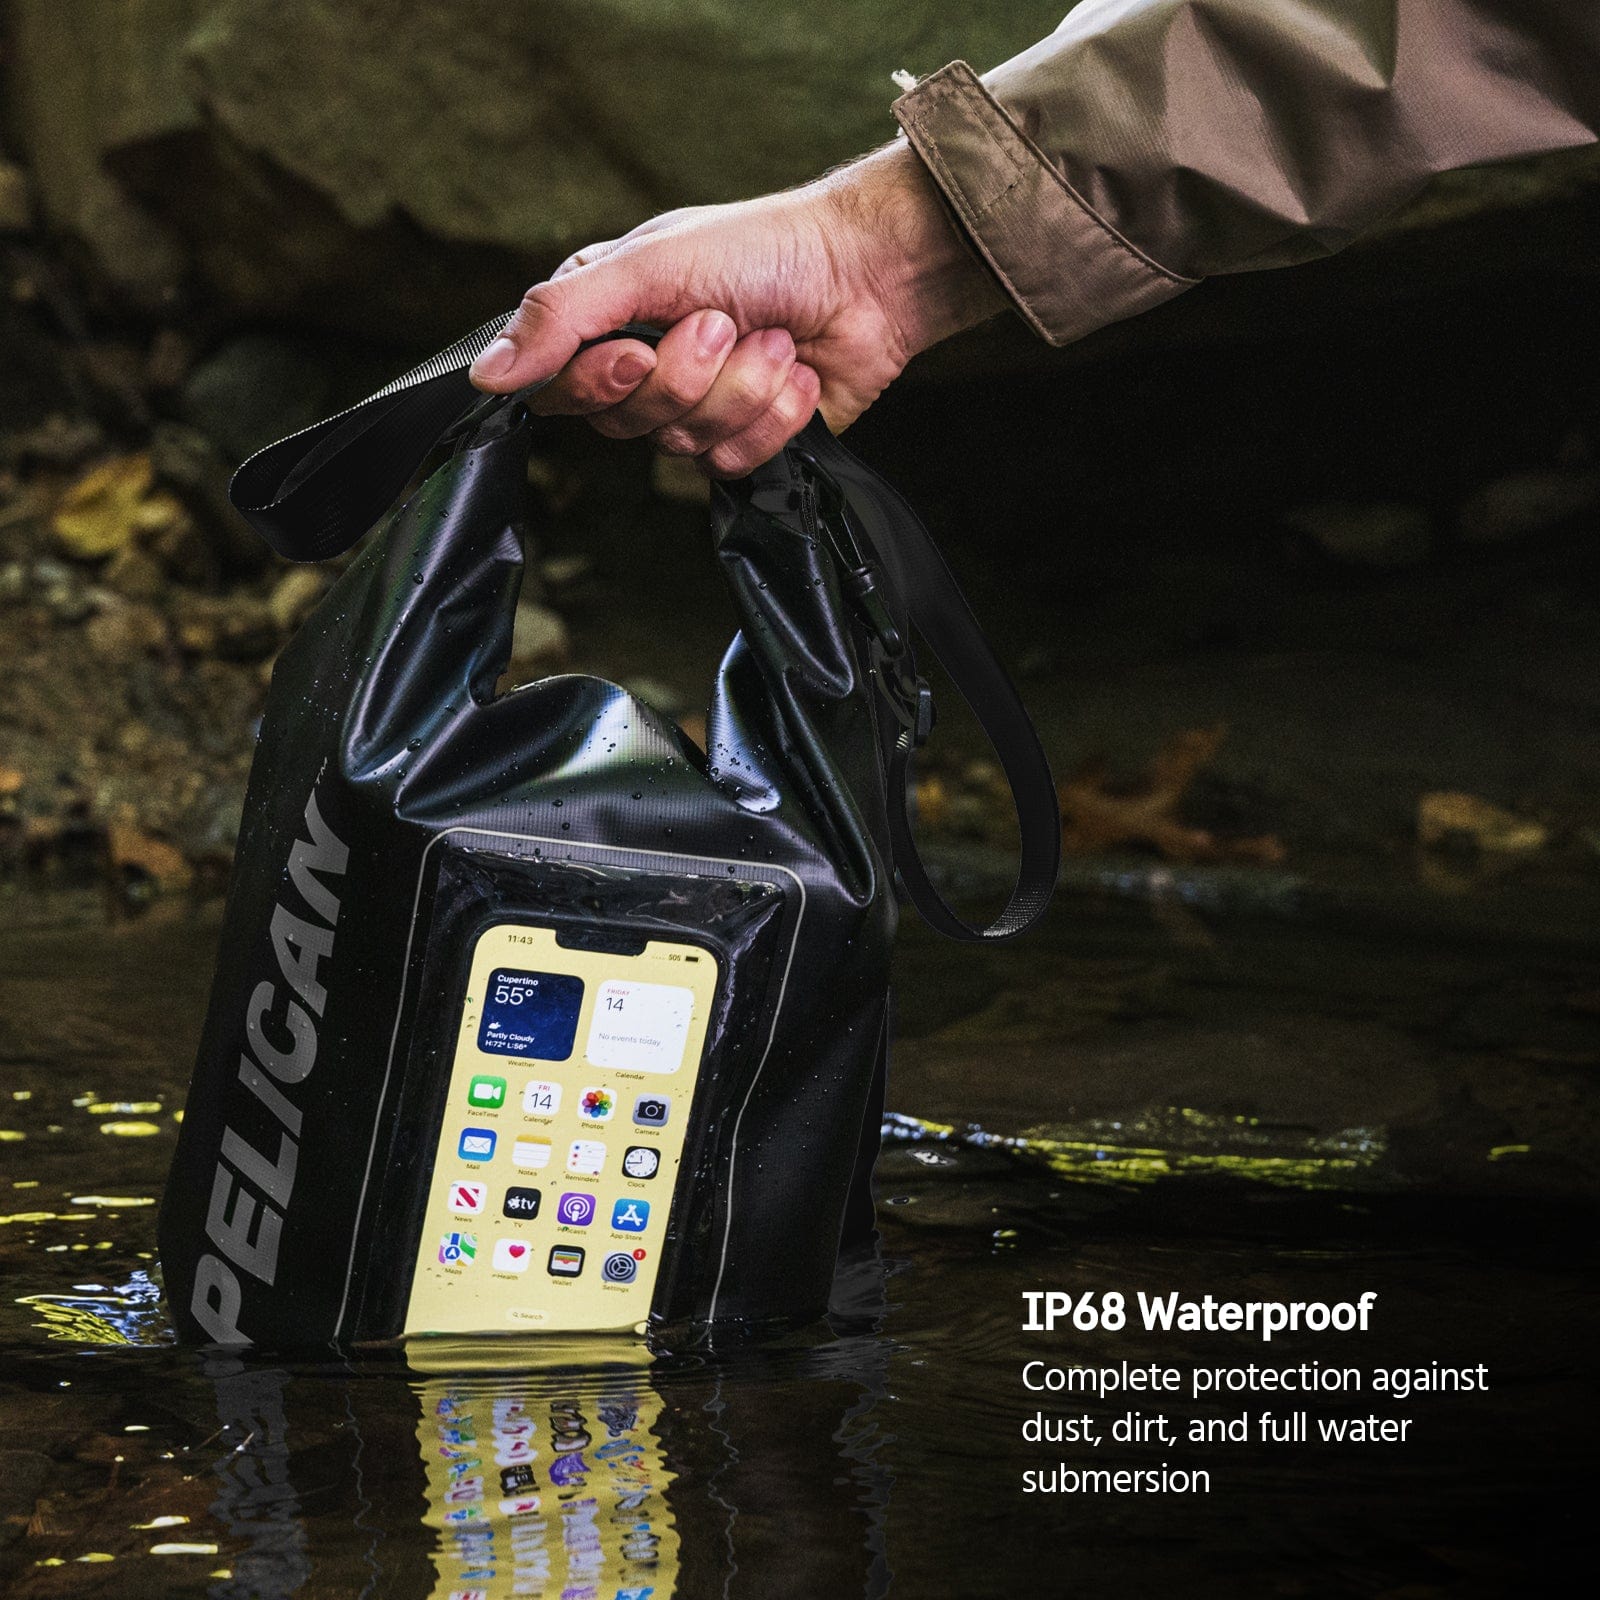 IP68 Waterproof. Complete Protection against dust, dirt, and full water submersion.